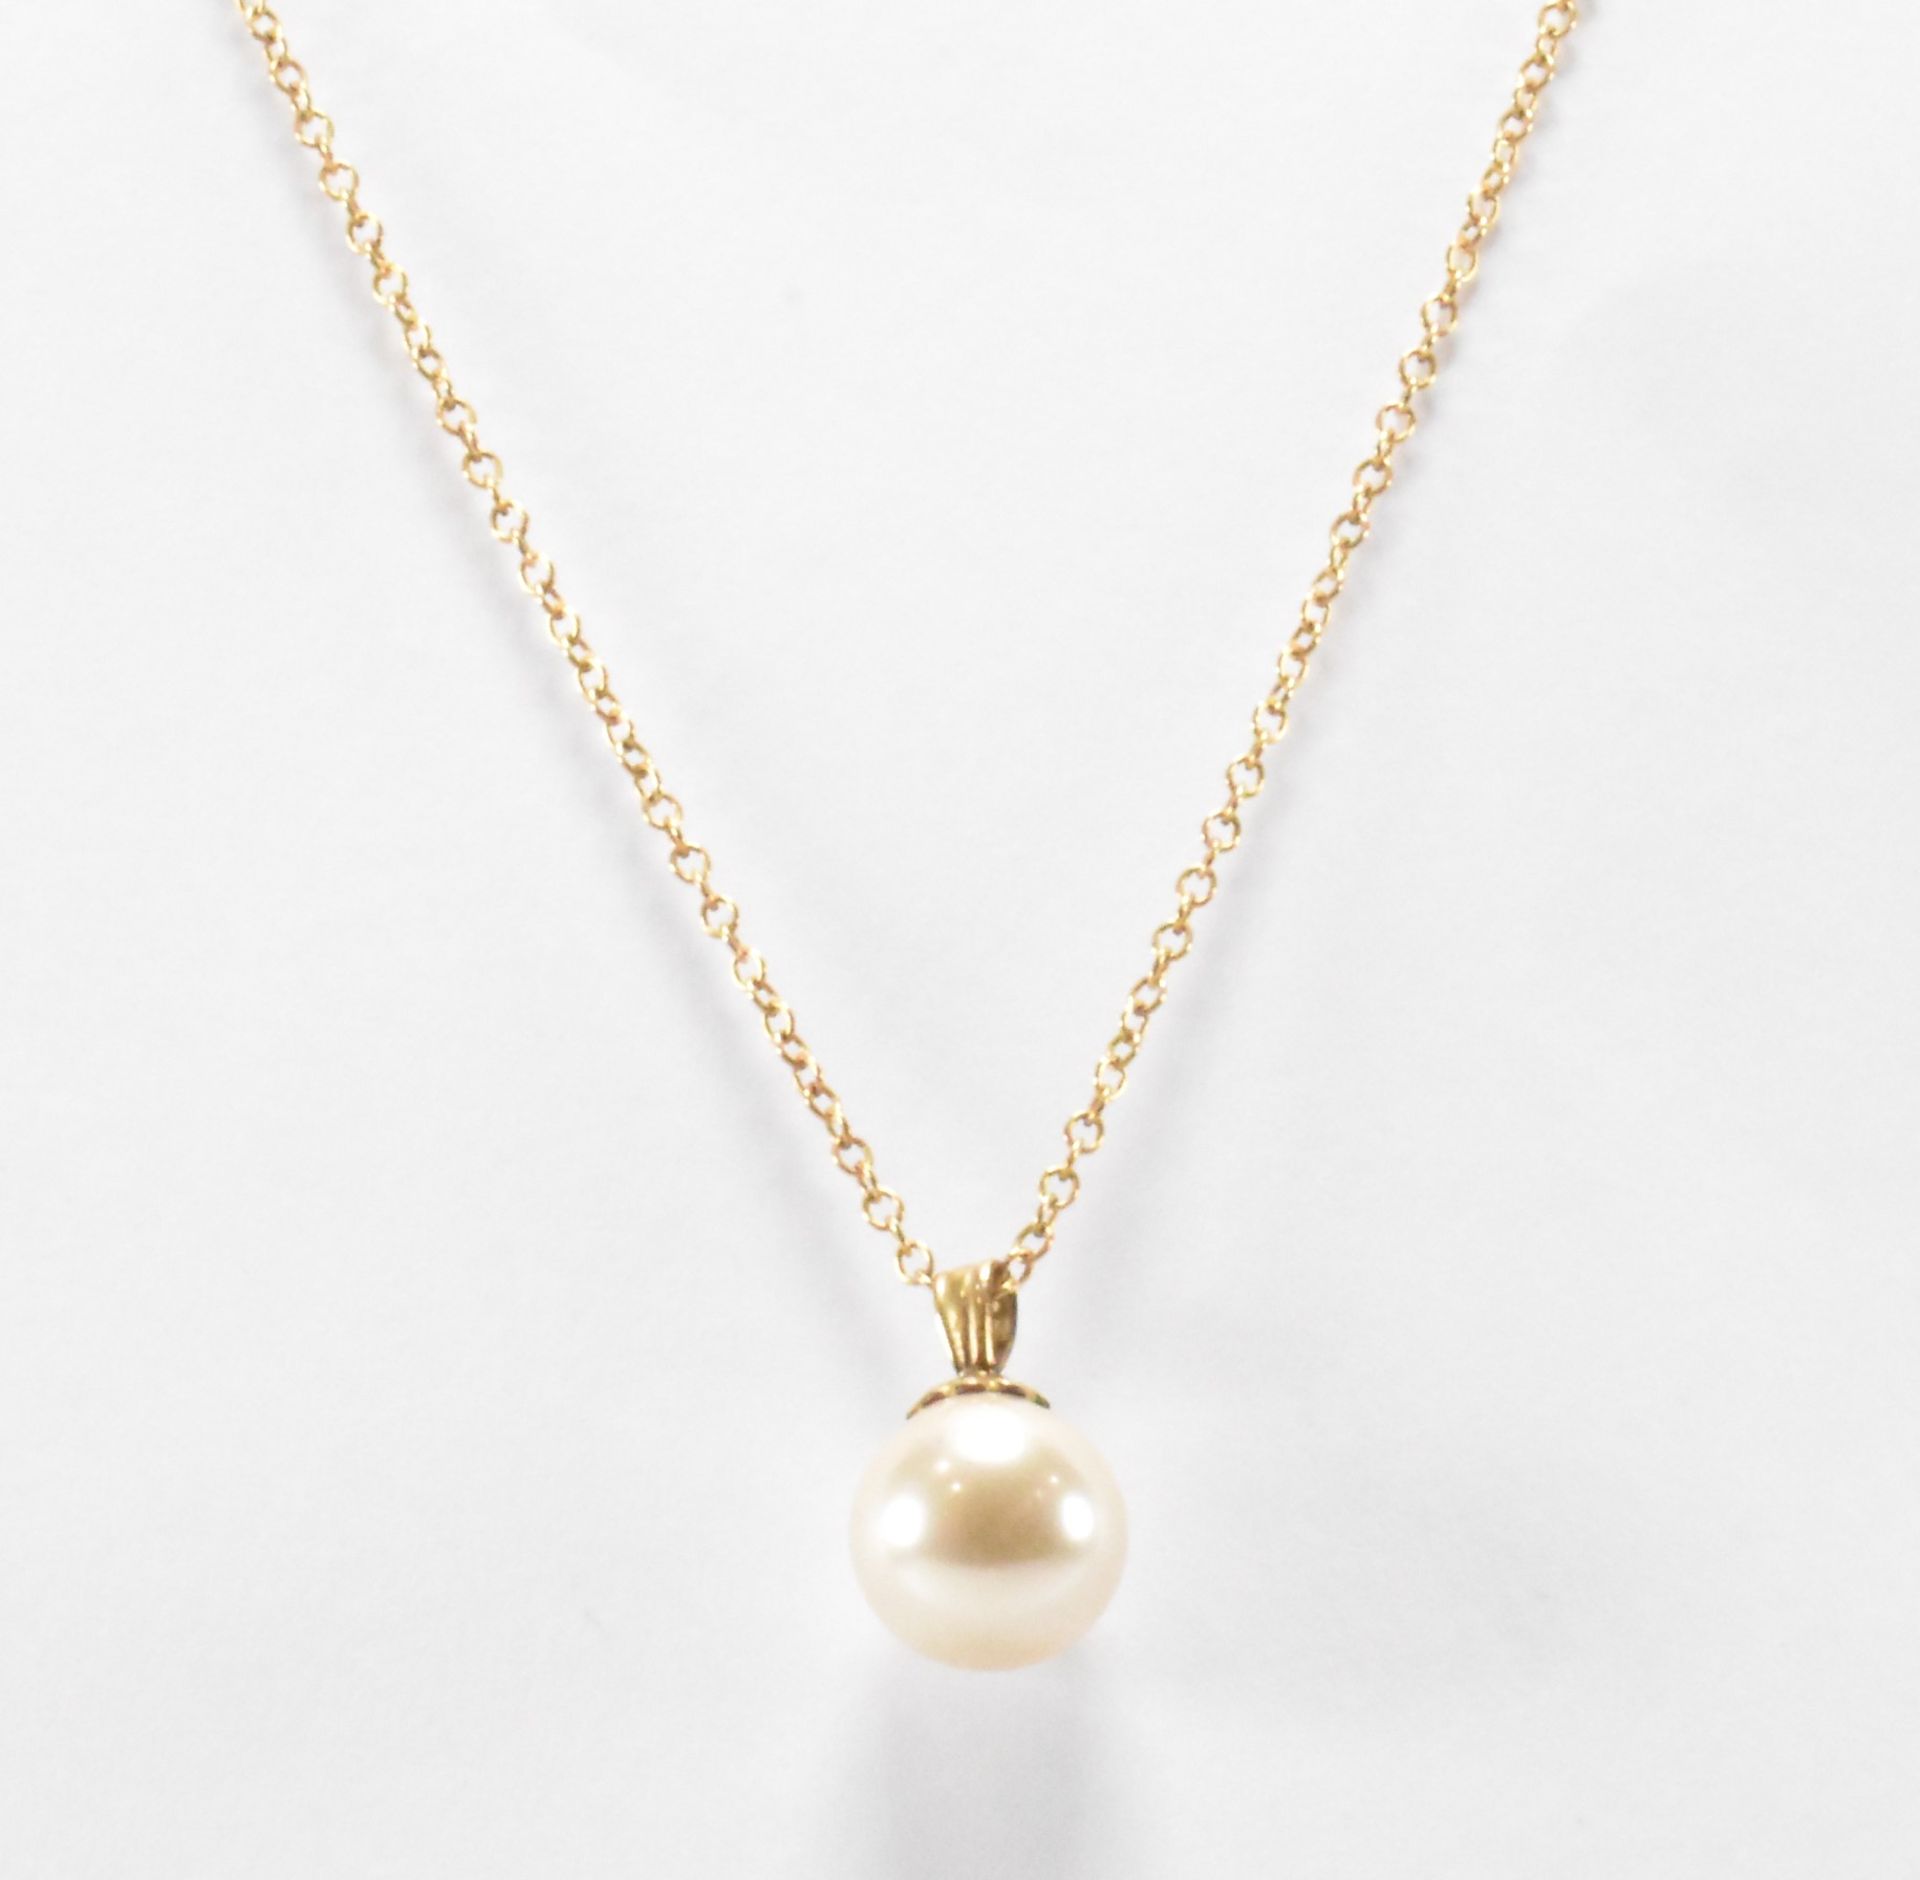 14CT GOLD & PEARL PENDANT NECKLACE